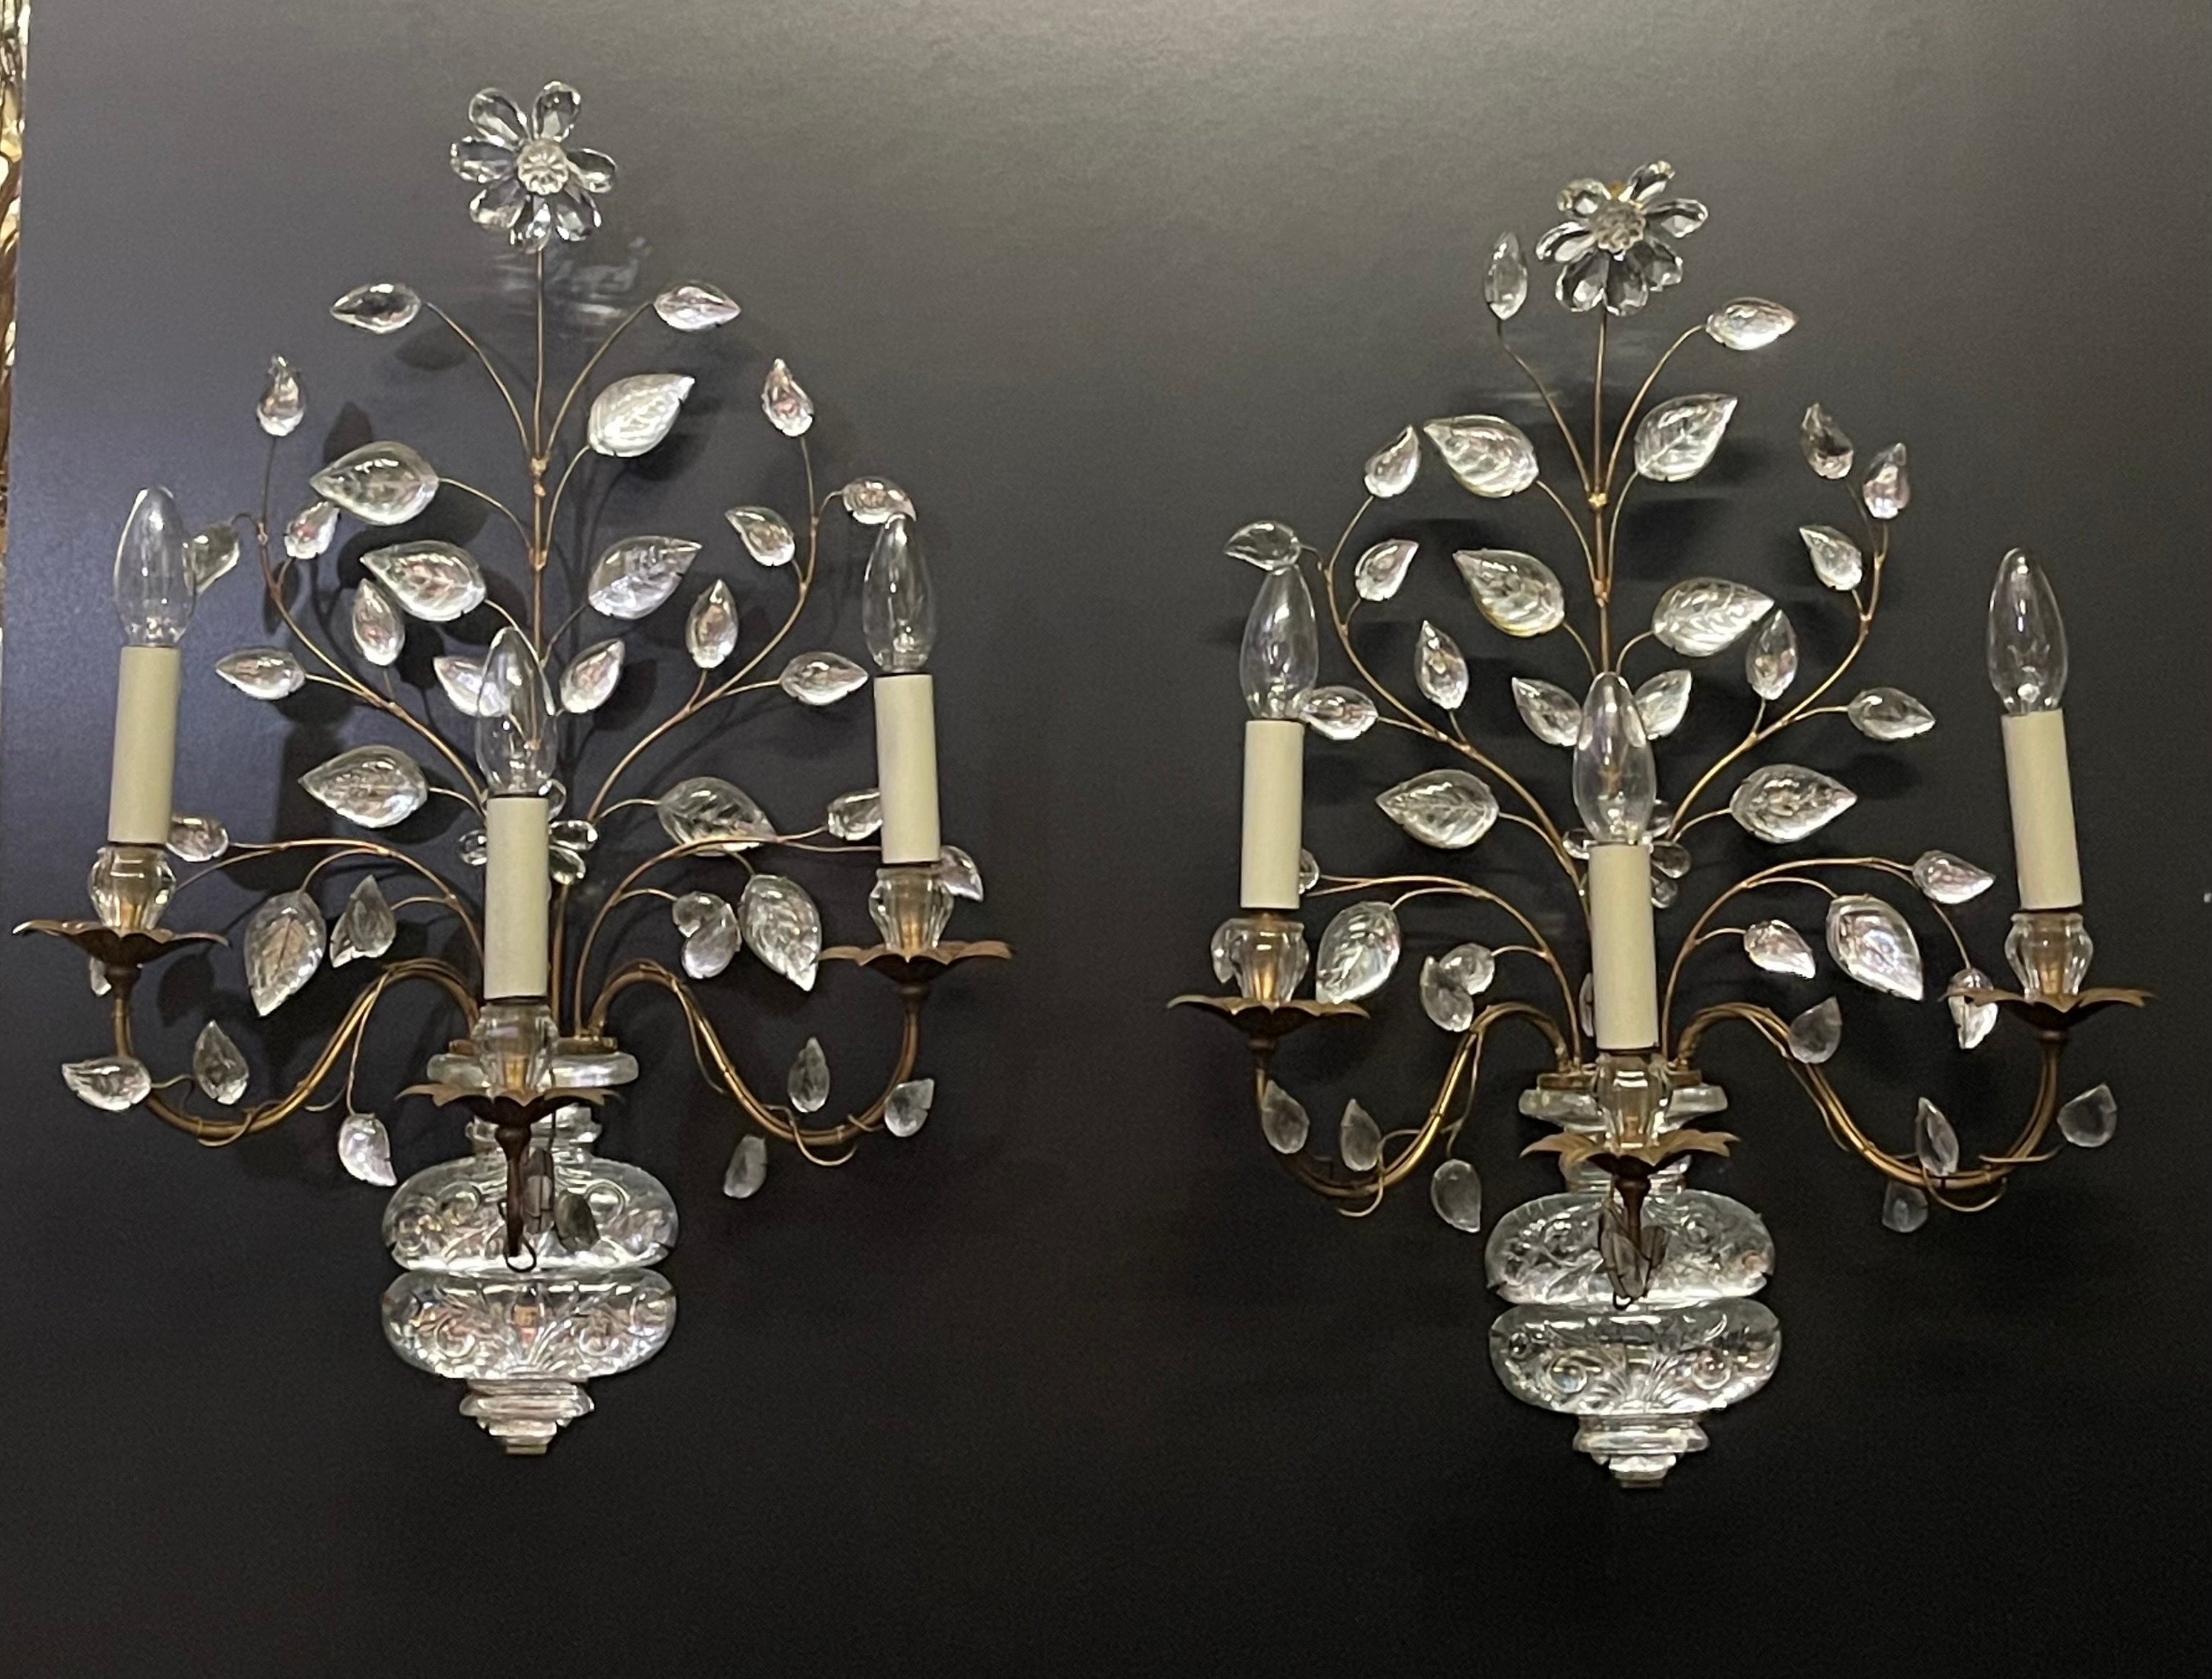 A wonderful pair of large gilt iron and crystal wall sconces by Maison Baguès, Paris, circa 1930s.
The measurements:
Height 24.40 inches x Width 16.53 inches x D 9.44 inches
Socket : each E 14 for standard screw bulbs.
New wiring for US standards on